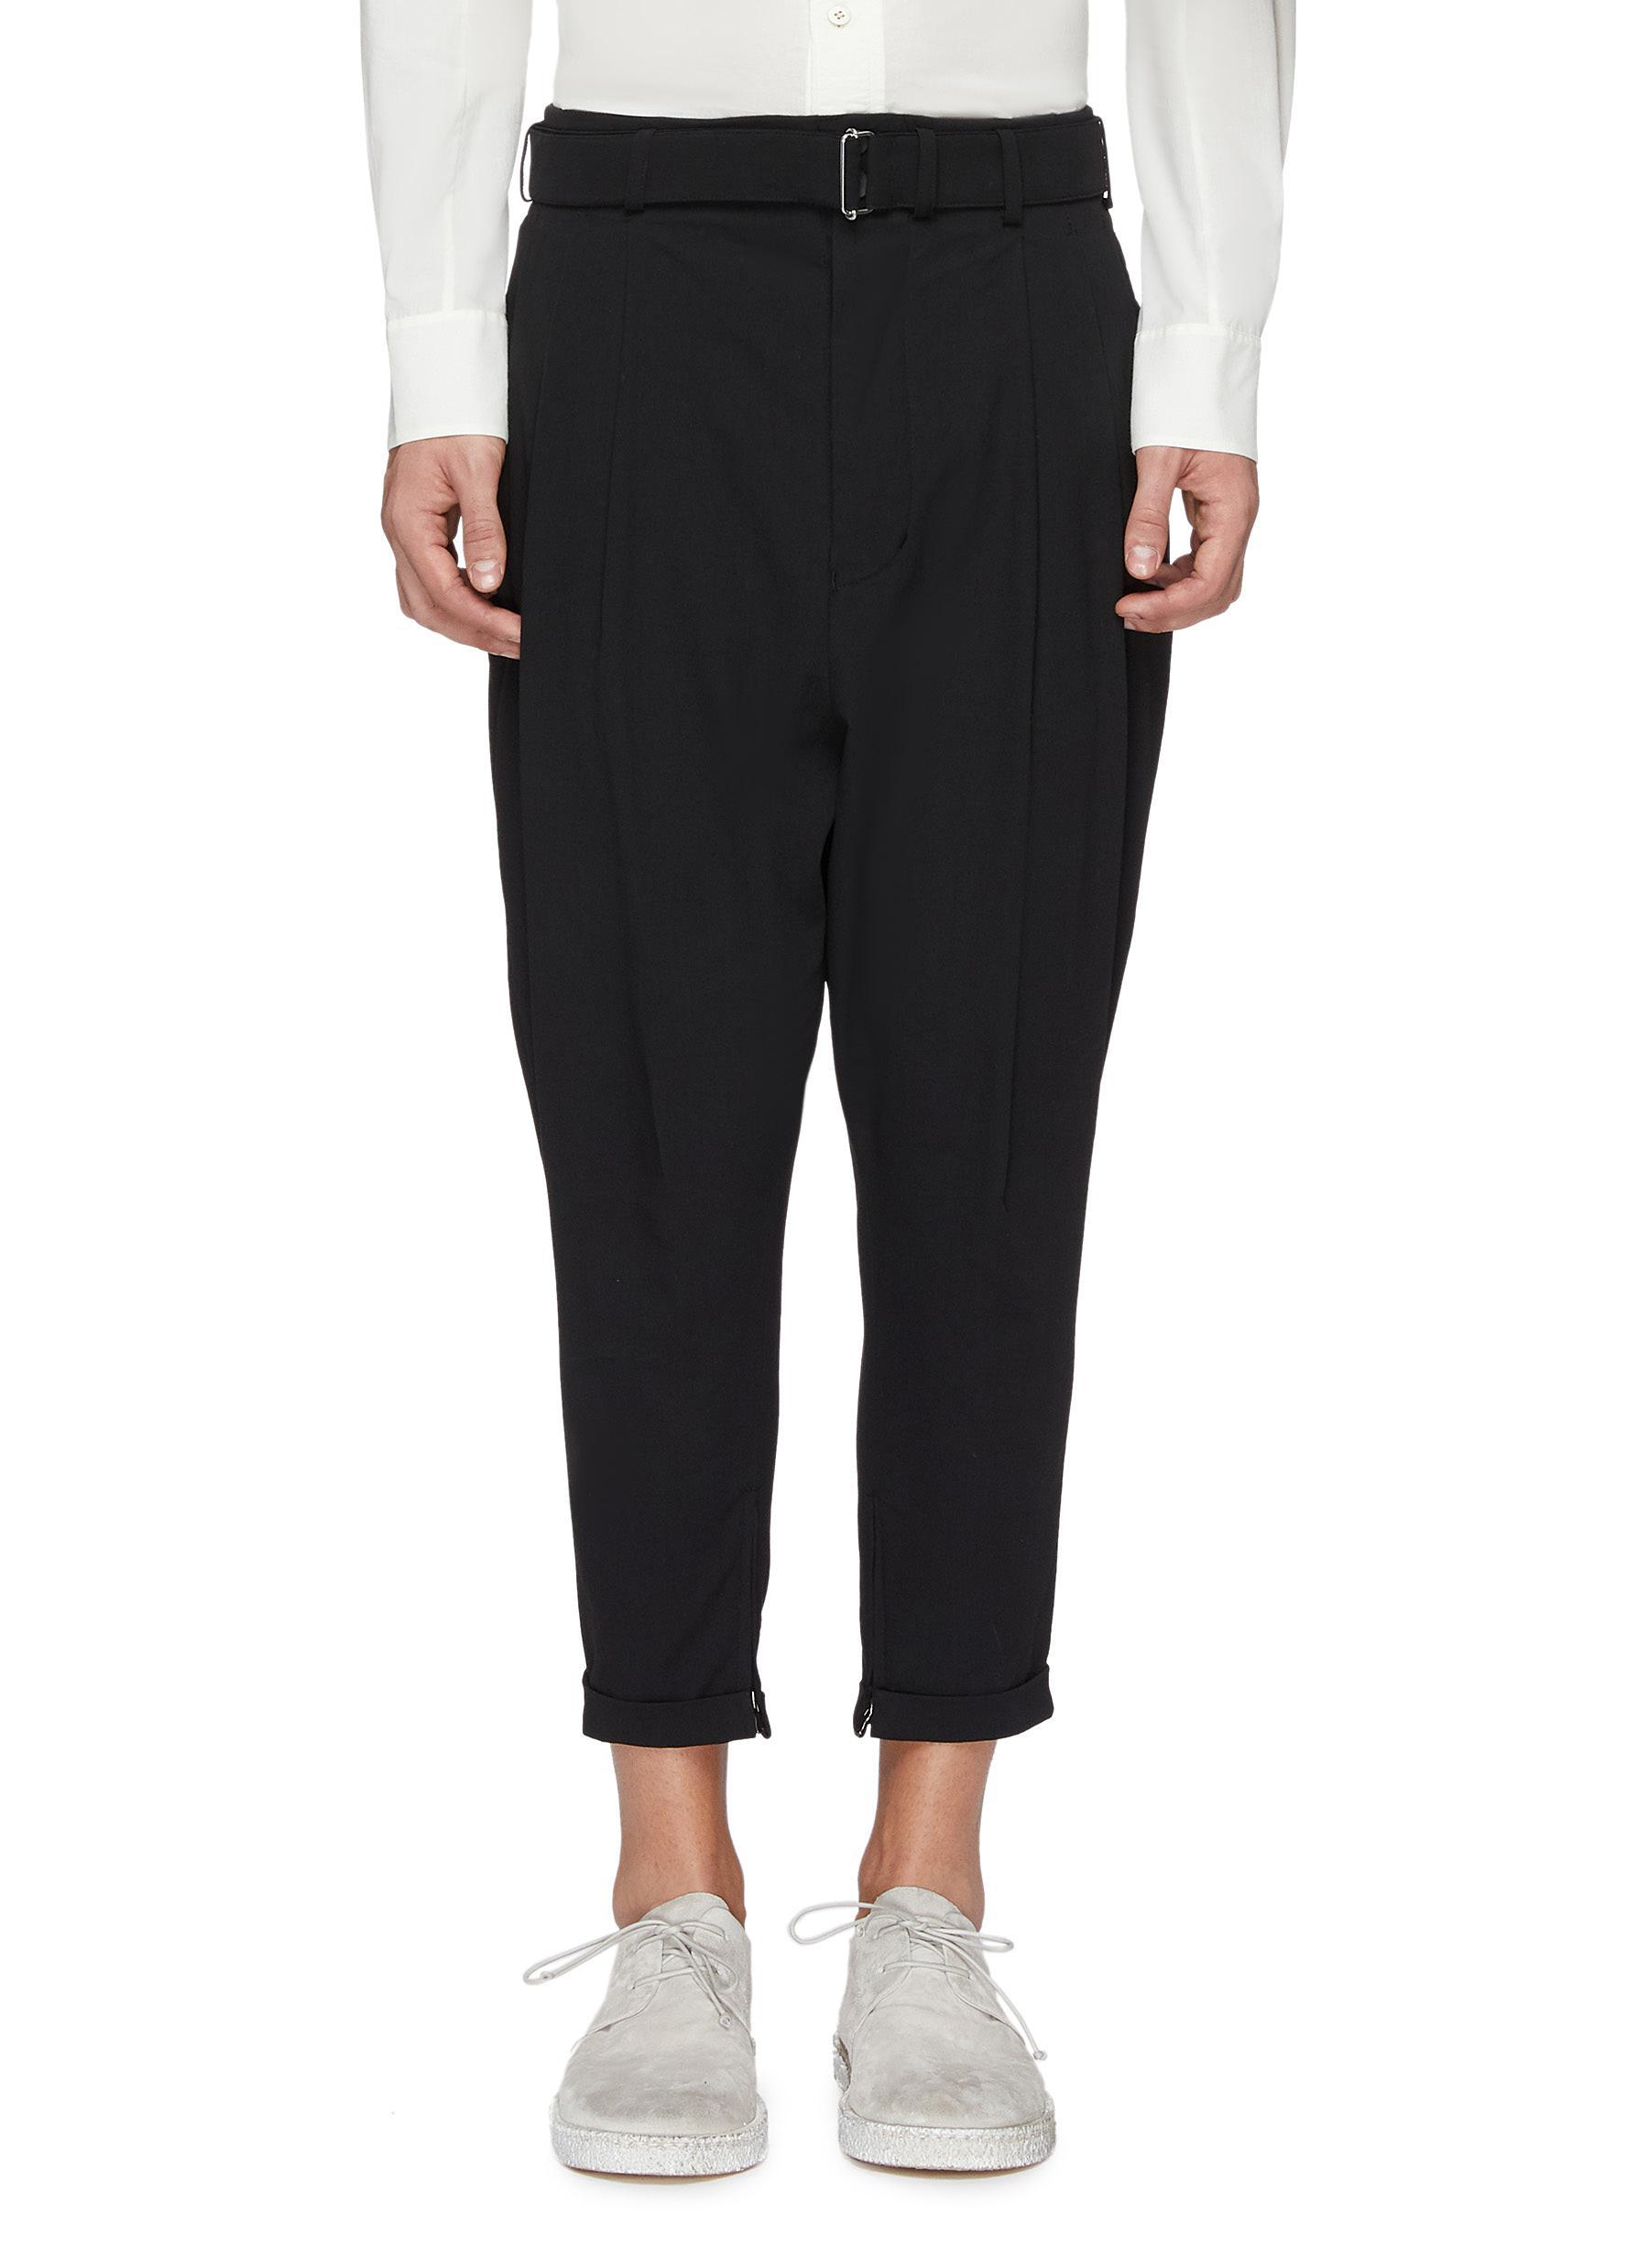 The Viridi-anne Cotton Buckled Zip Cuff Pants in Black for Men - Lyst